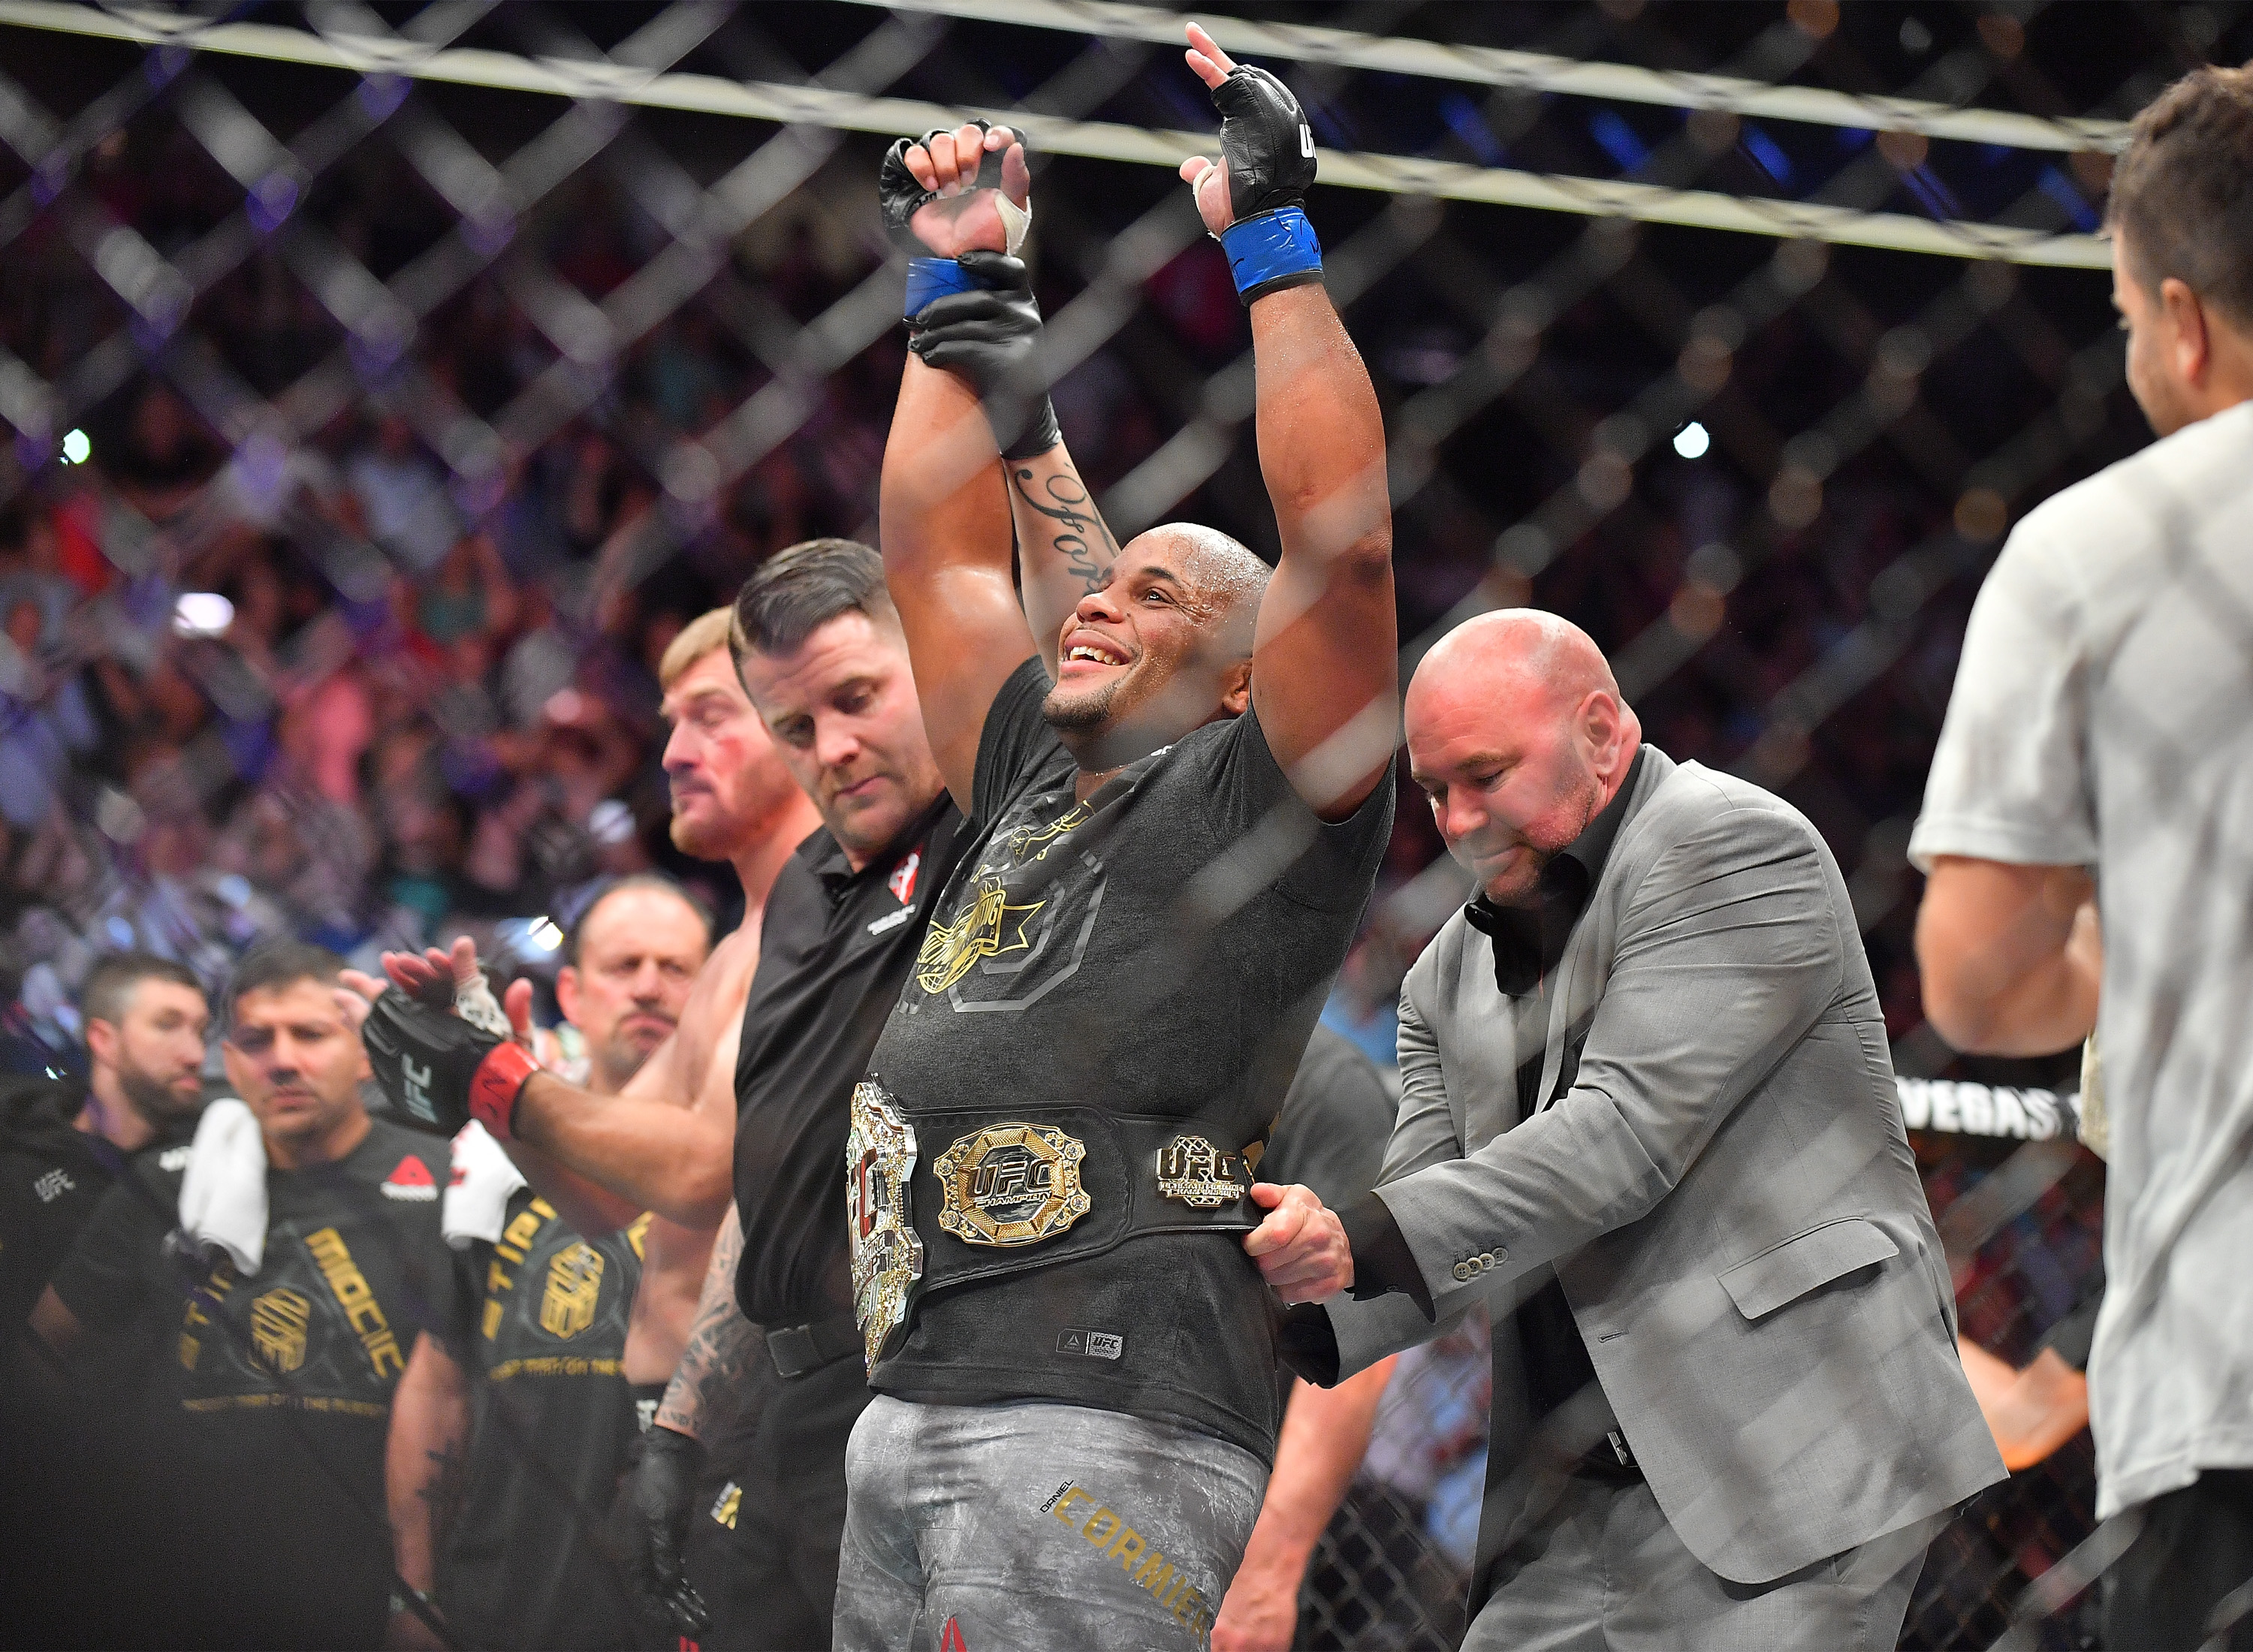 LAS VEGAS, NV - JULY 07: UFC President Dana White (R) places the championship belt around the waist of Daniel Cormier after he defeated Stipe Miocic in their heavyweight championship fight at T-Mobile Arena on July 7, 2018 in Las Vegas, Nevada. Cormier won by first round knockout. (Photo by